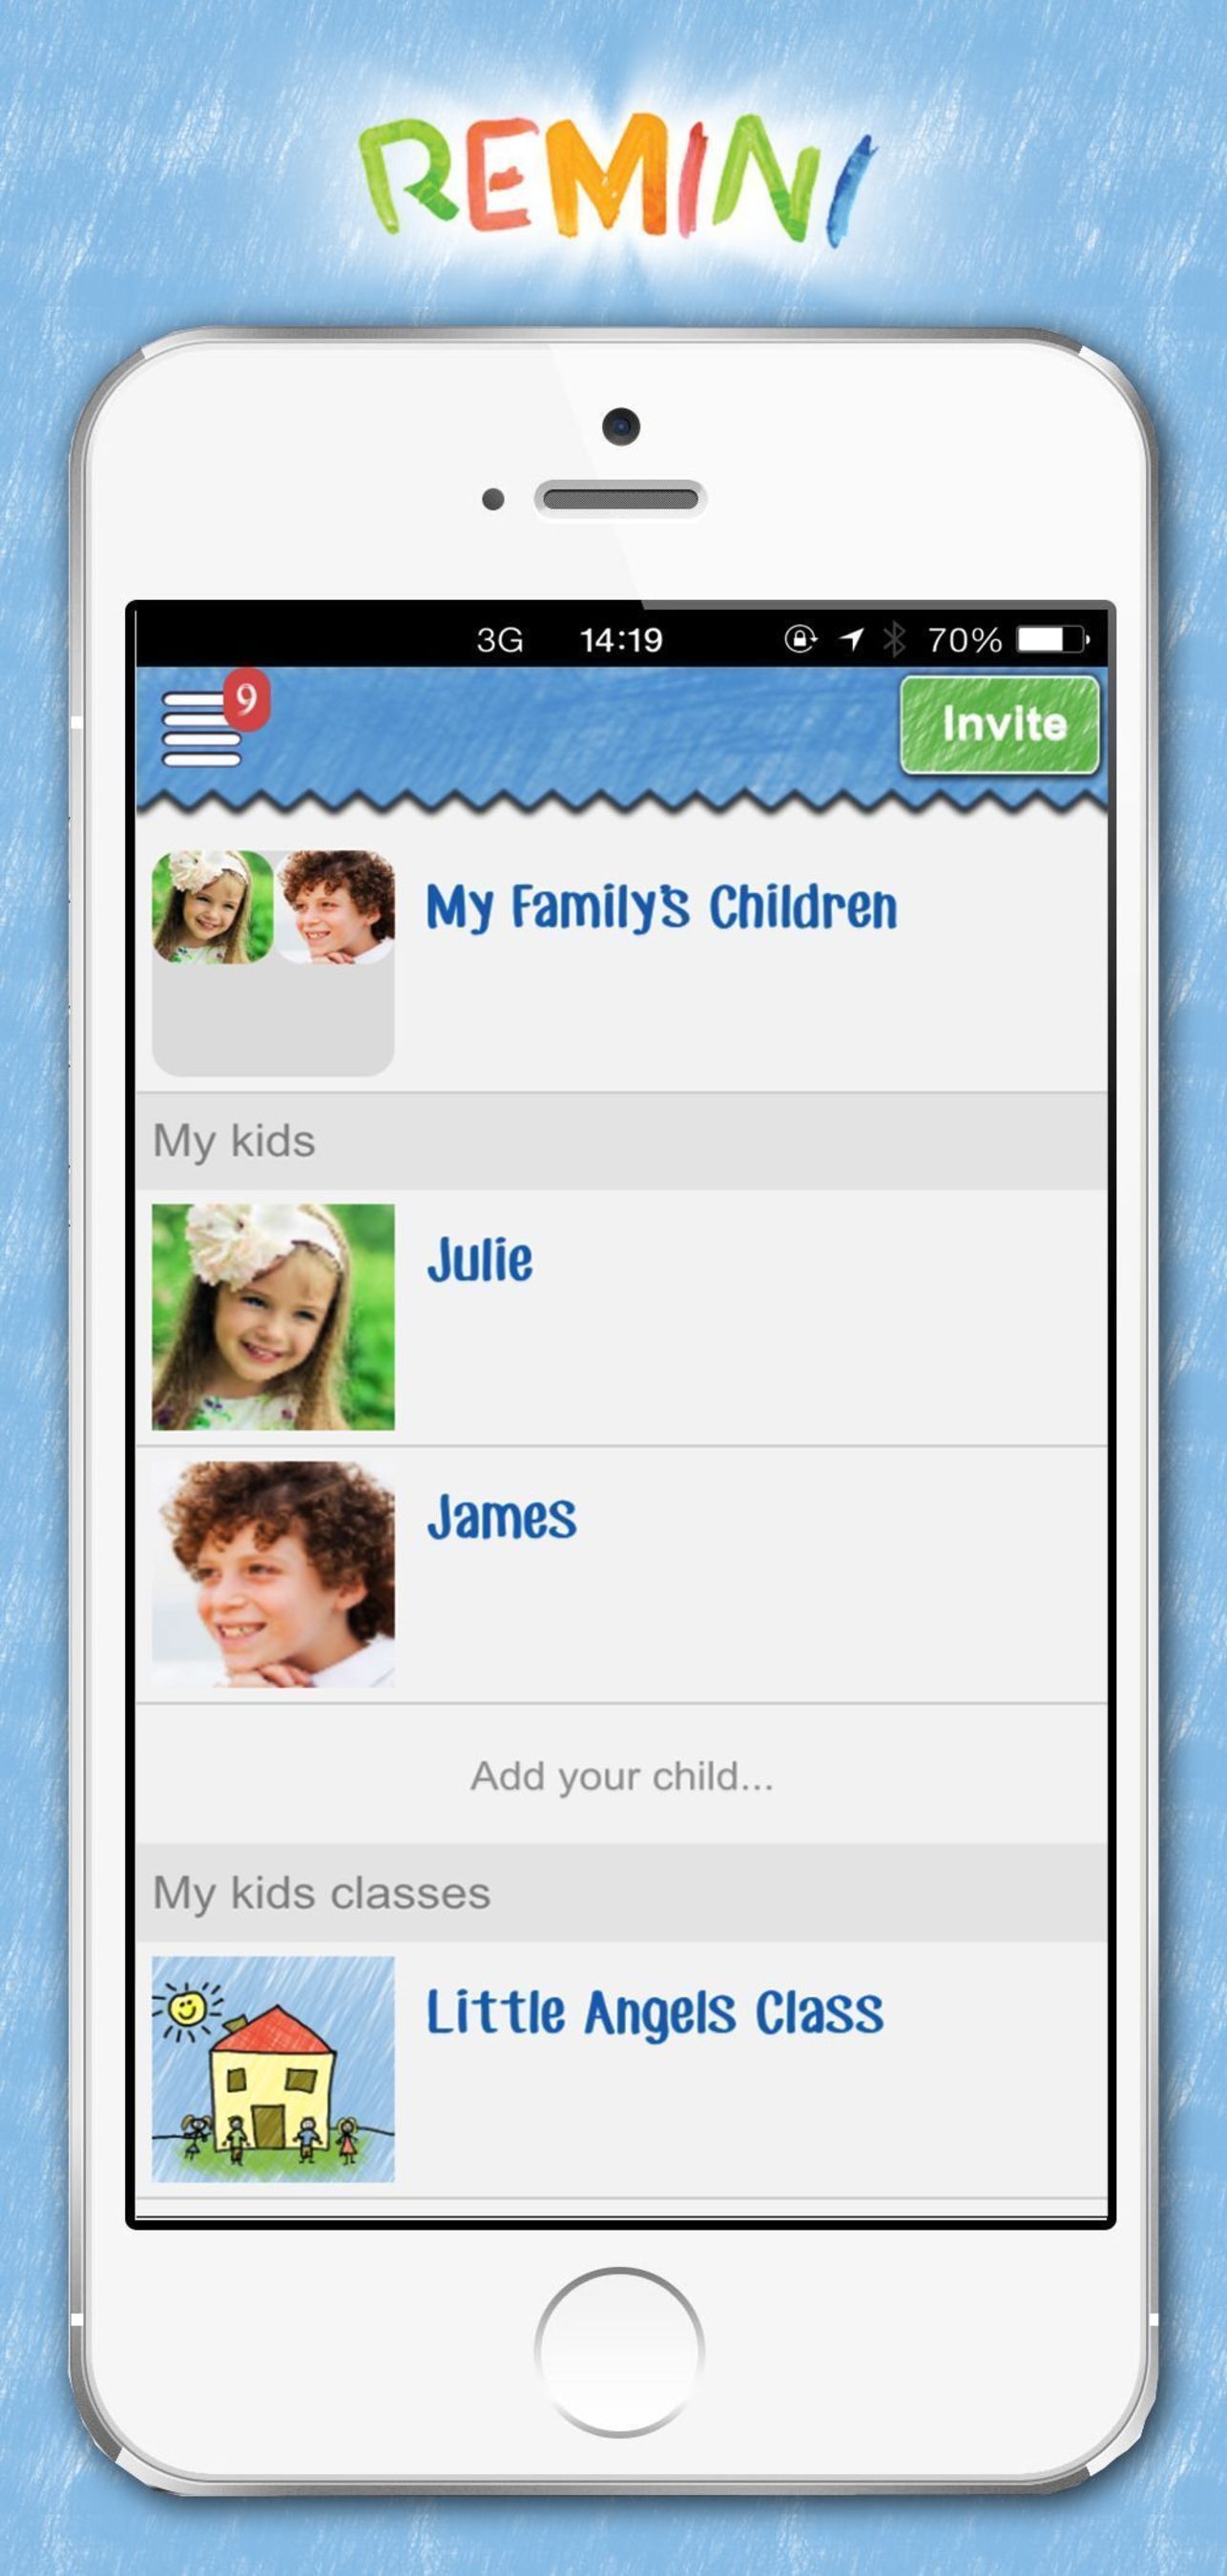 In Remini, users build their child's life story and connect with early childhood educators adding materials and updates from the school day to the child's timeline. The platform is easy to use, secure, and creates dialogue between parents and teachers. (PRNewsFoto/Remini)